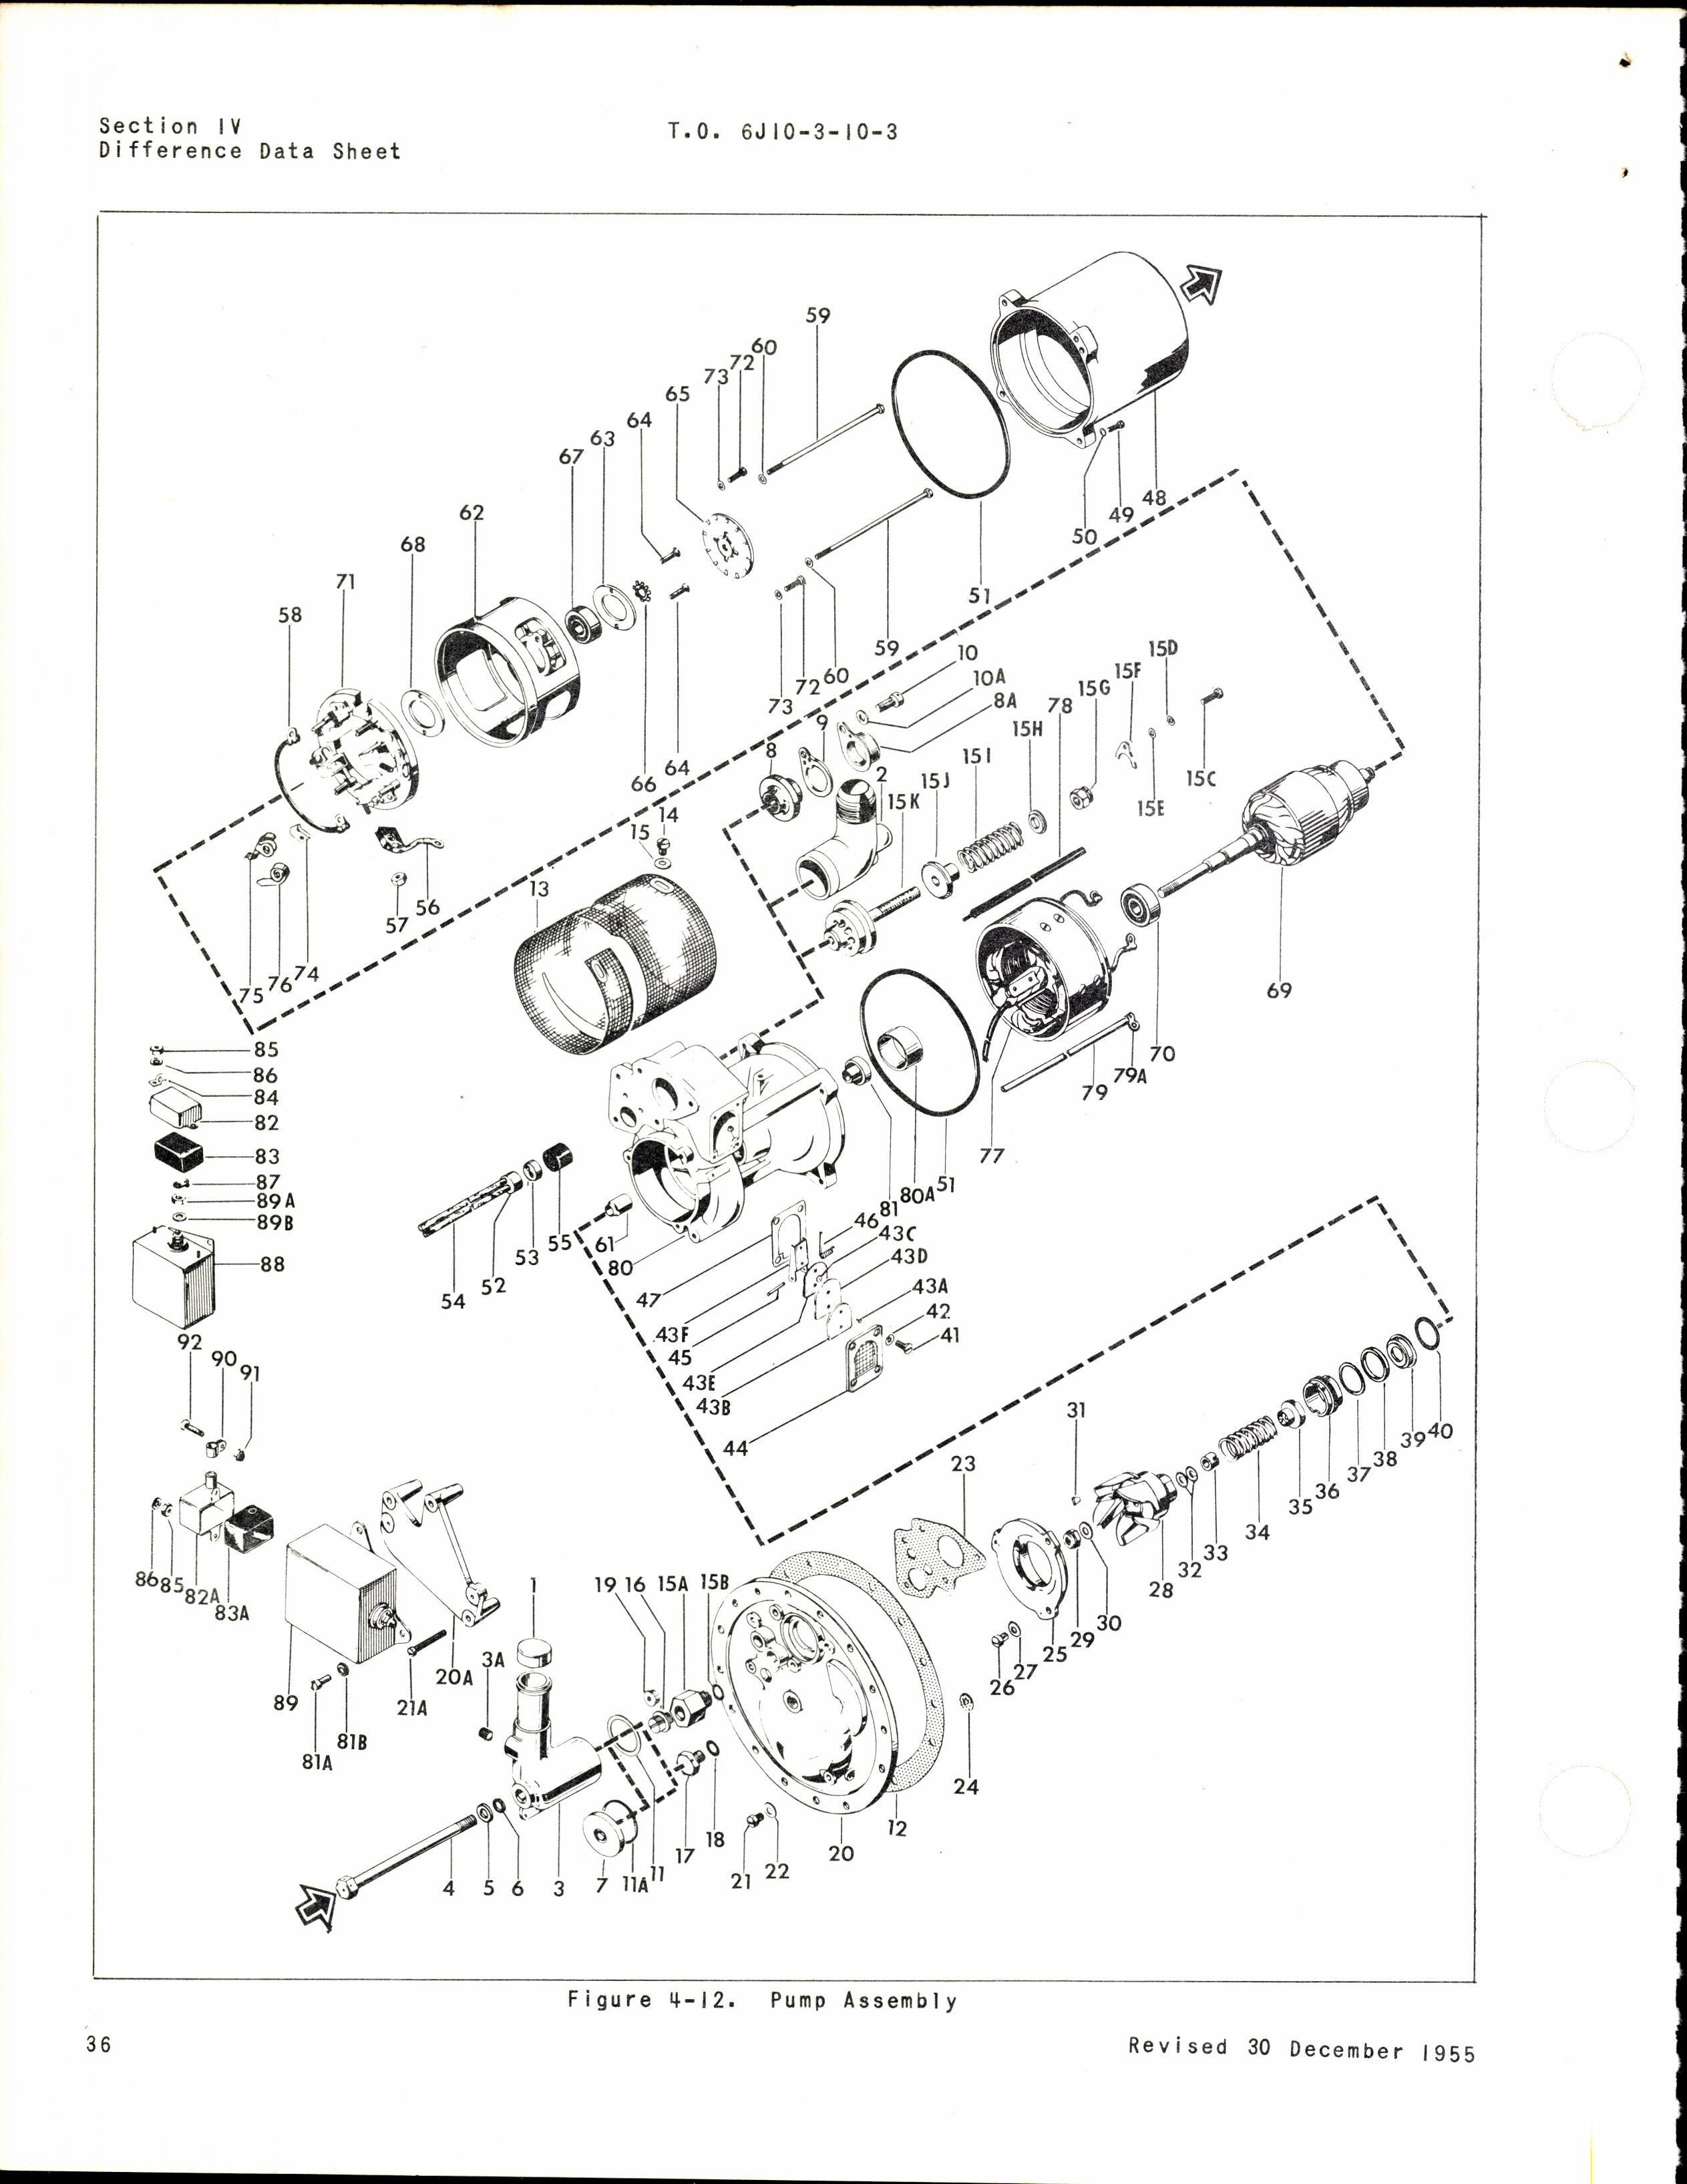 Sample page 28 from AirCorps Library document: Overhaul Instructions for Submerged Fuel Booster Pumps